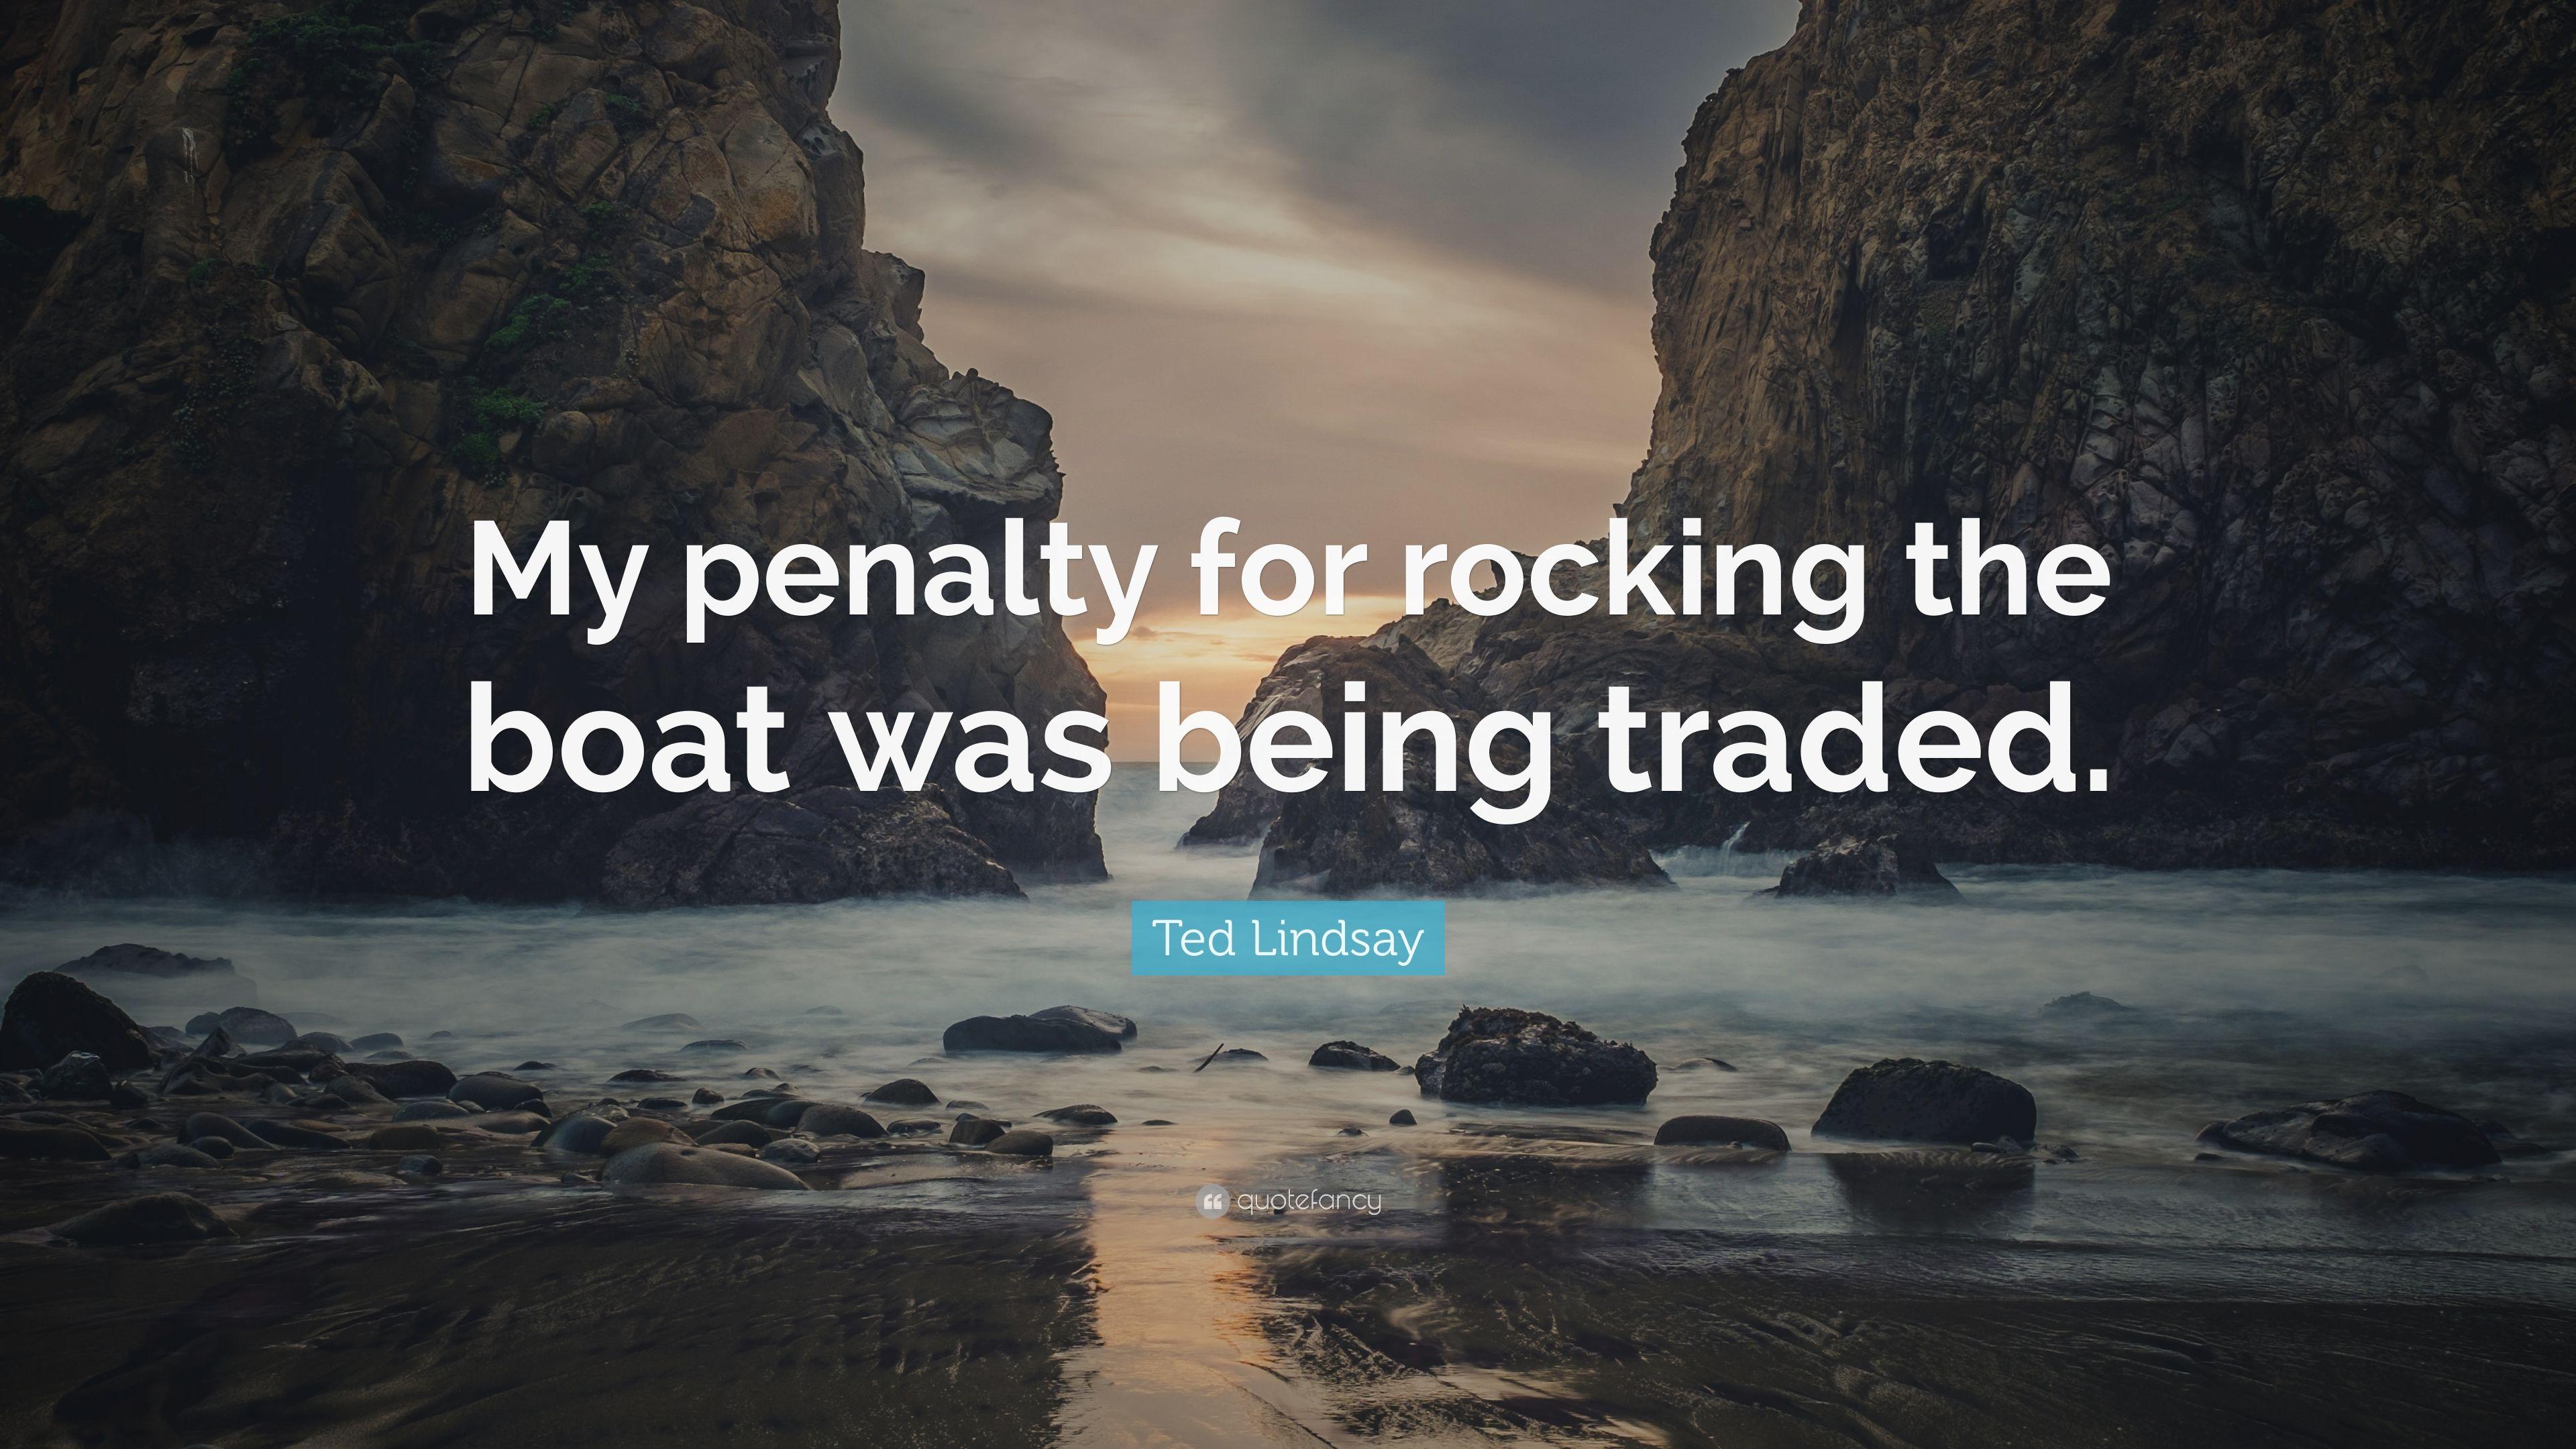 Ted Lindsay Quote: “My penalty for rocking the boat was being traded